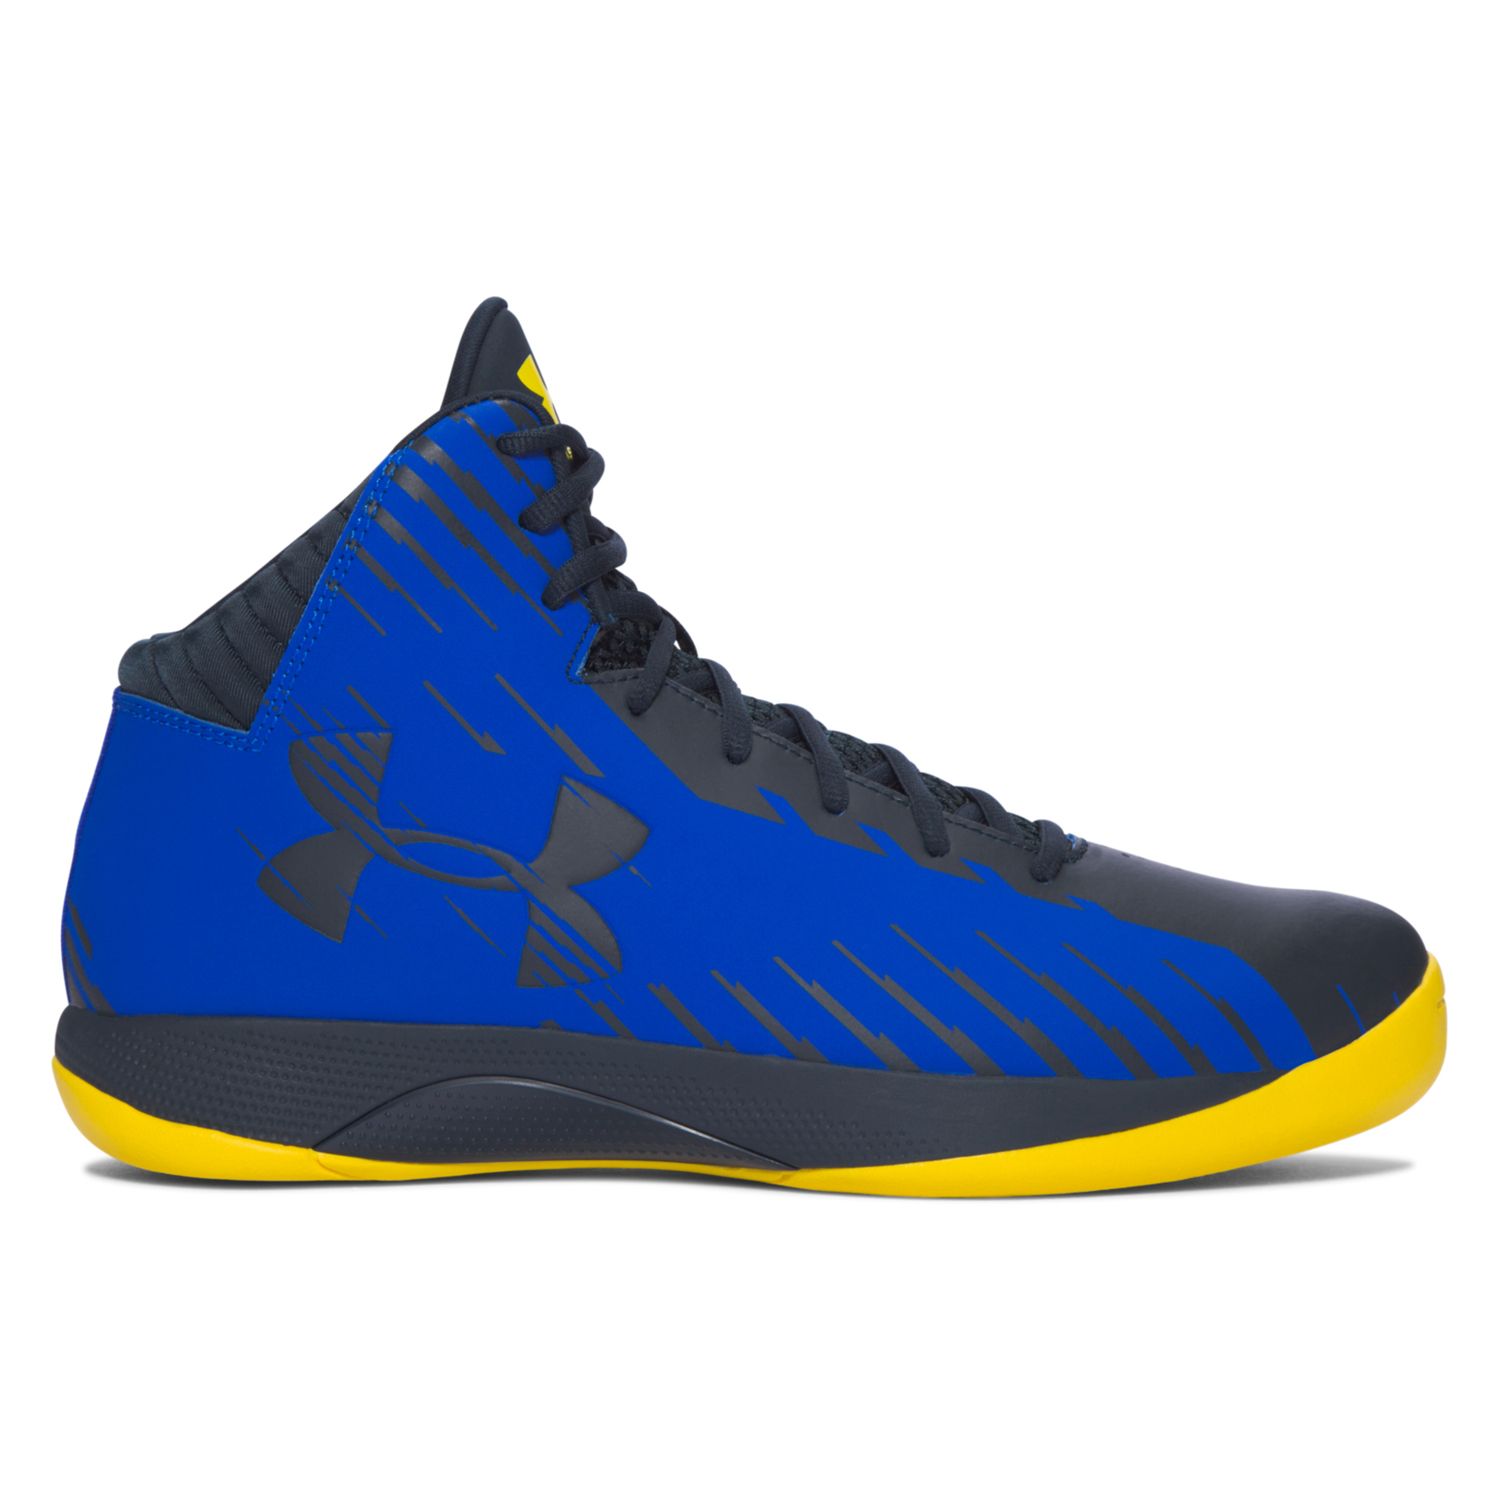 under armour jet mid men's basketball shoes